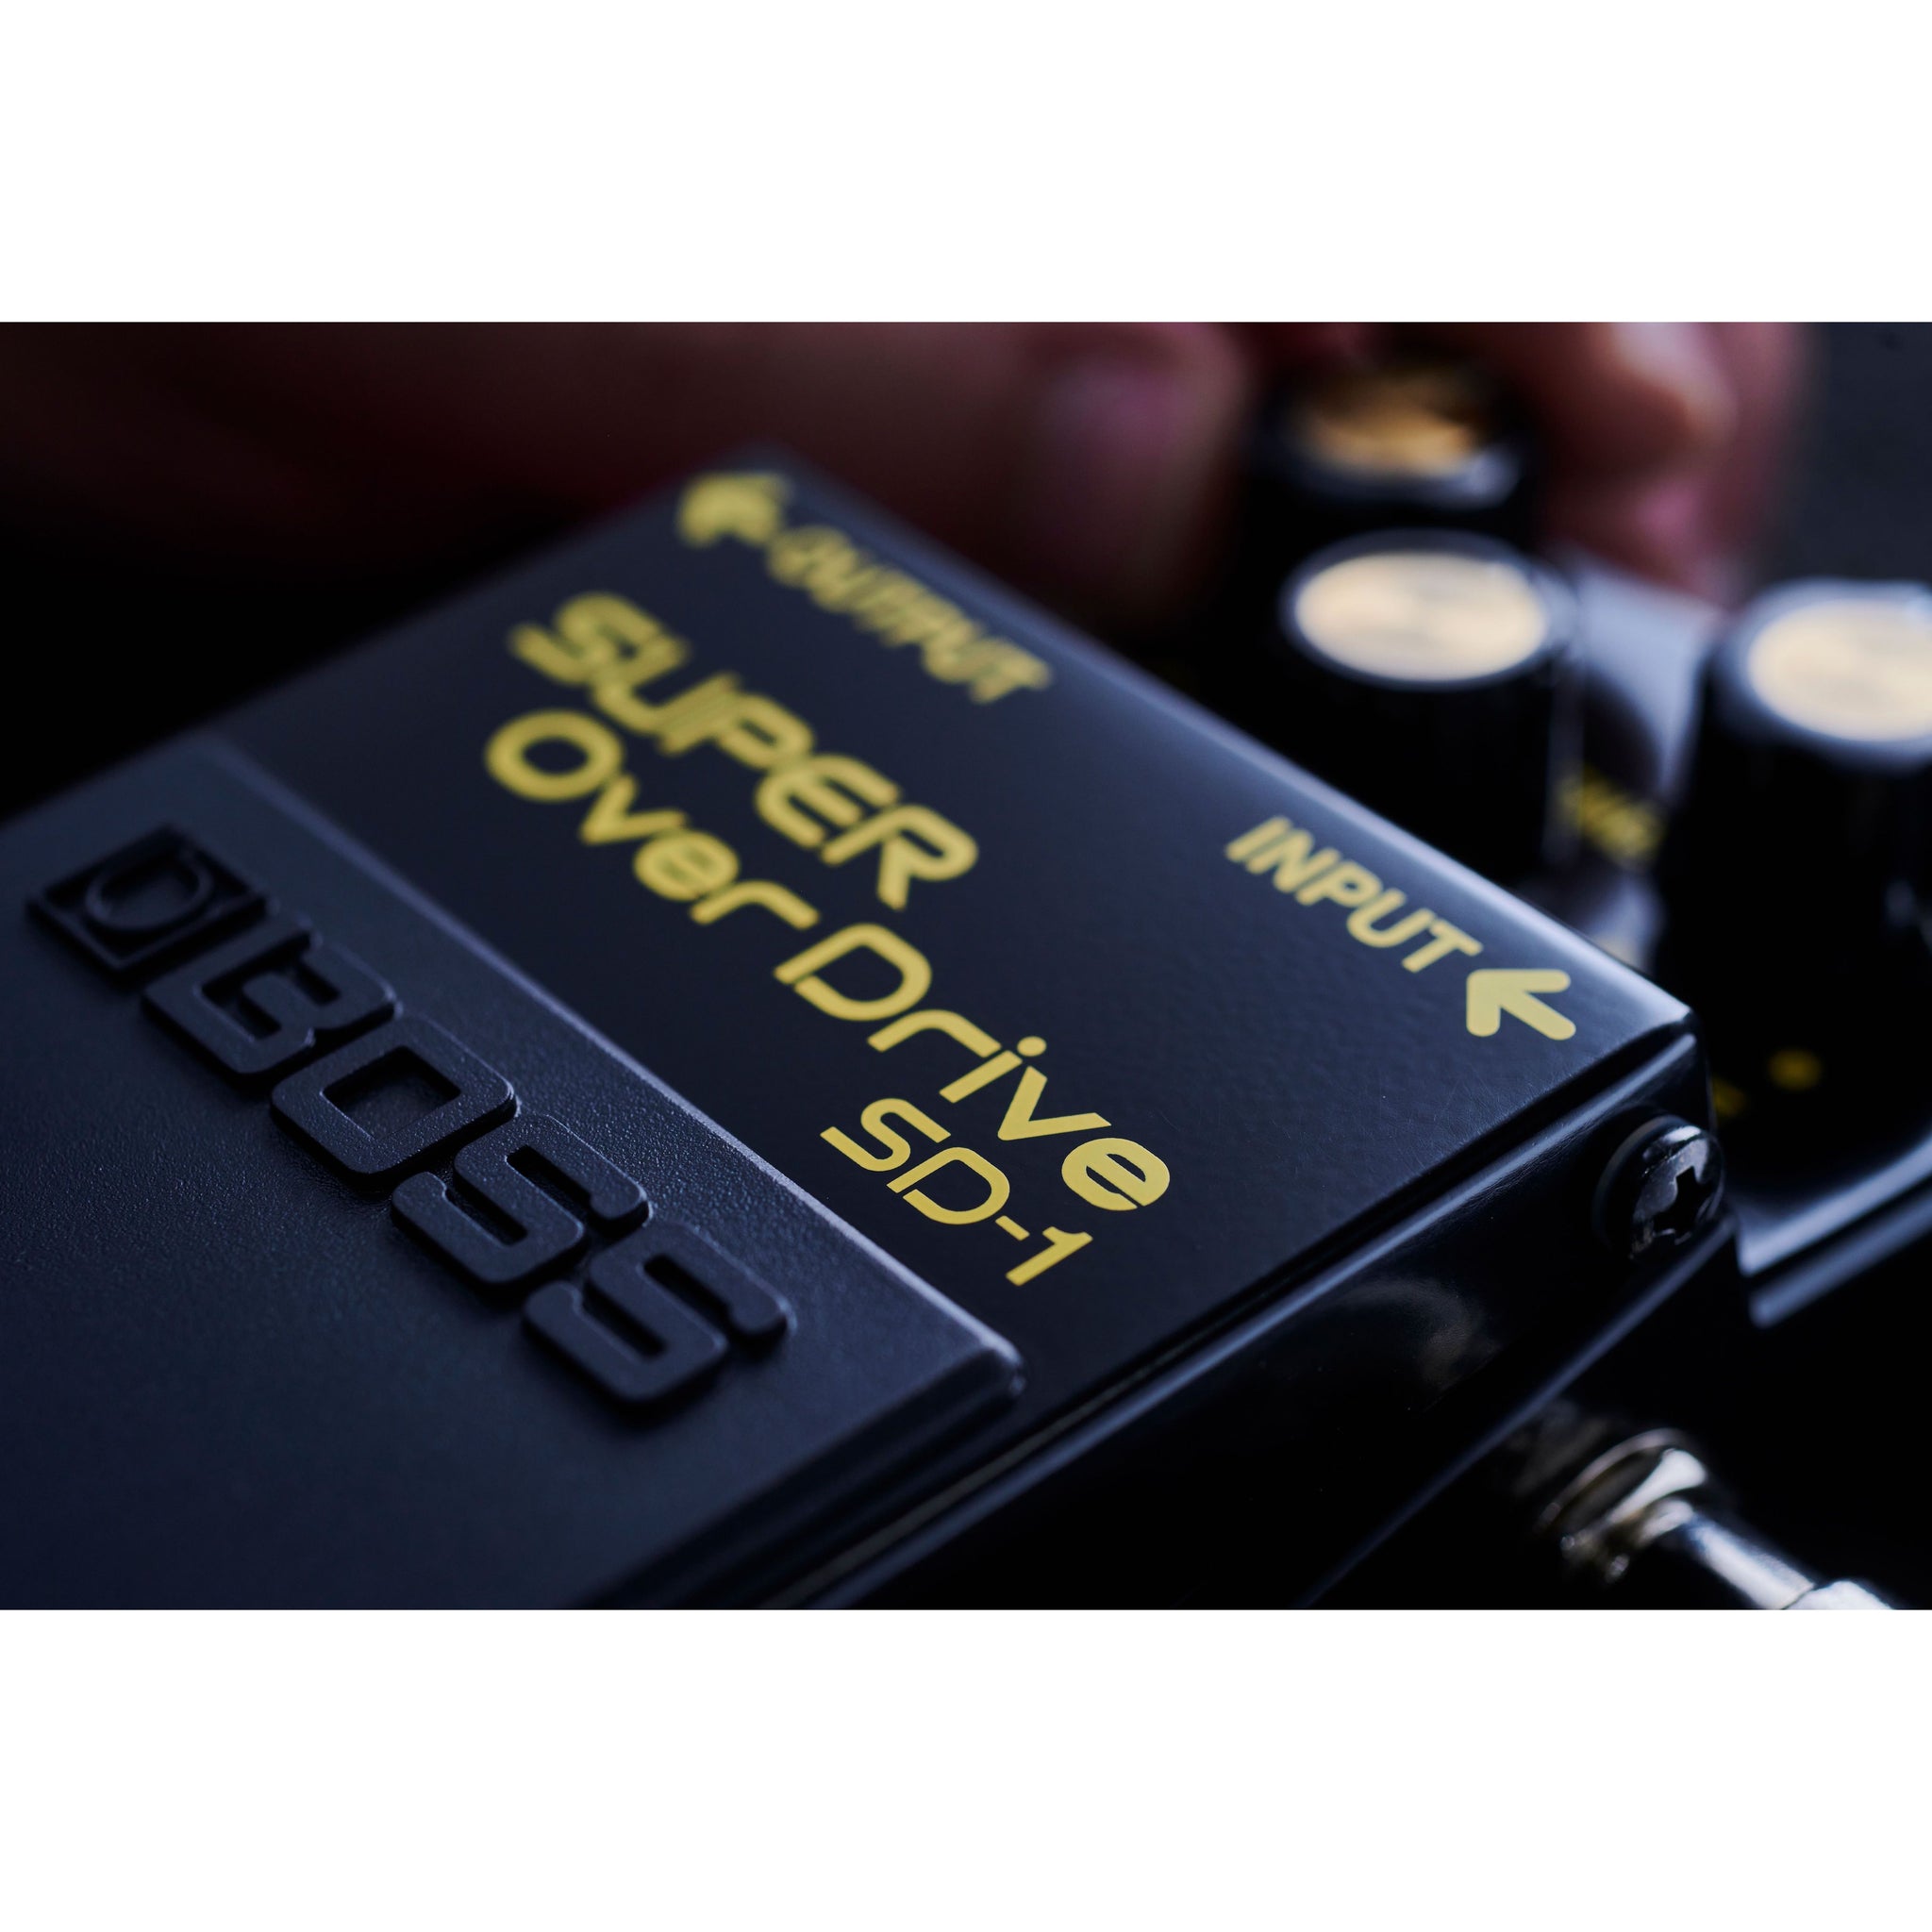 Boss SD-1-4A Limited Edition 40th Anniversary SD-1 Super Overdrive